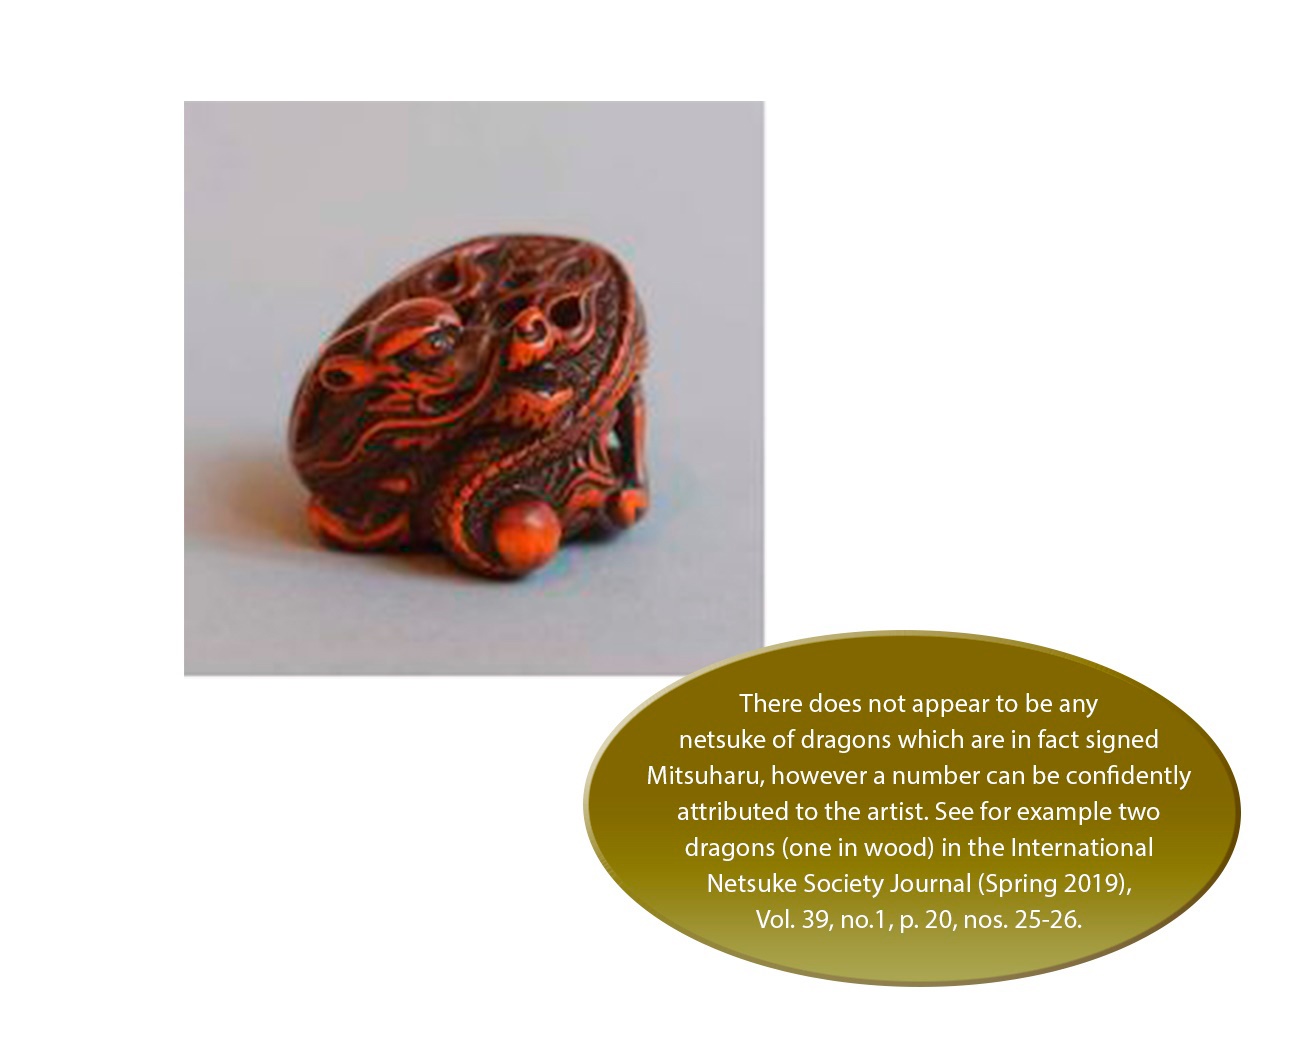 A POWERFUL AND RARE WOOD NETSUKE OF A COILED DRAGON, ATTRIBUTED TO MITSUHARU - Image 9 of 10